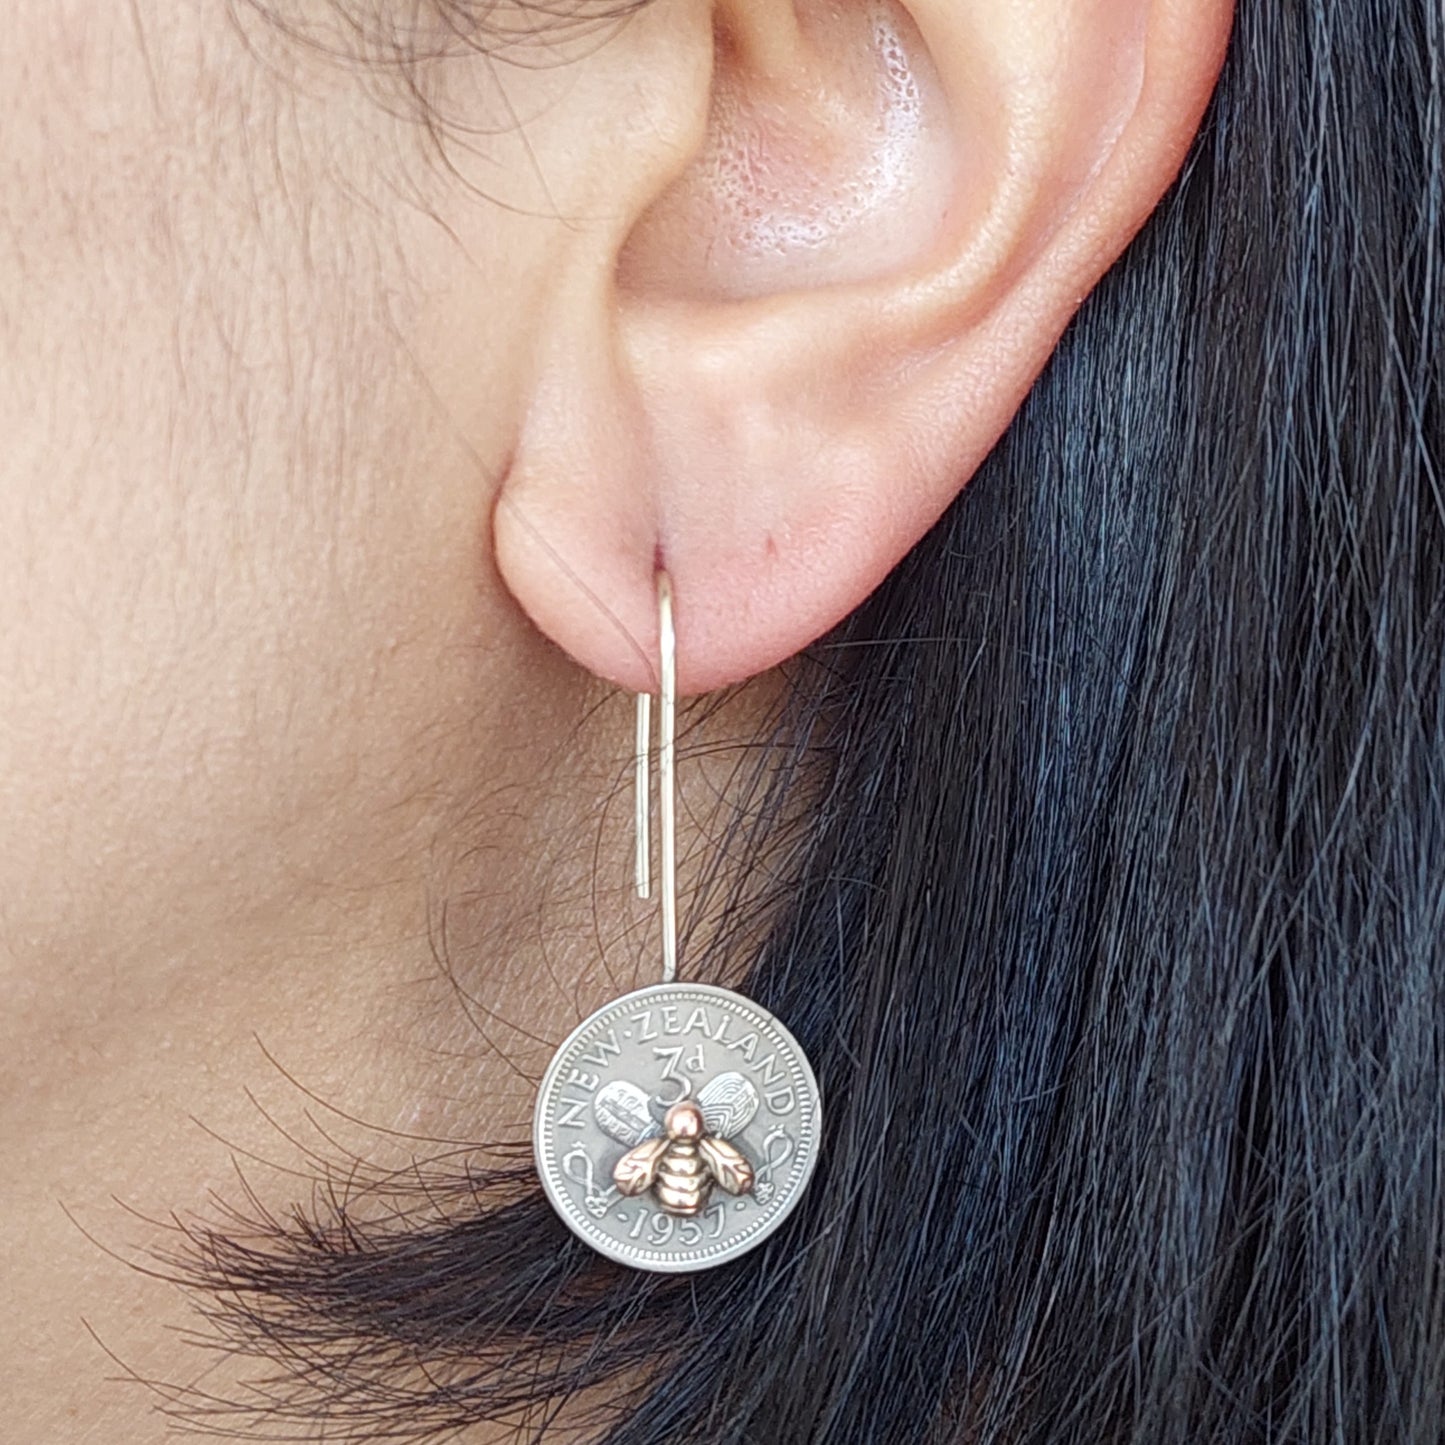 BESTSELLER! NEW!! Re-minted Artisan Coin Earrings with Tiny Bees - Threepence